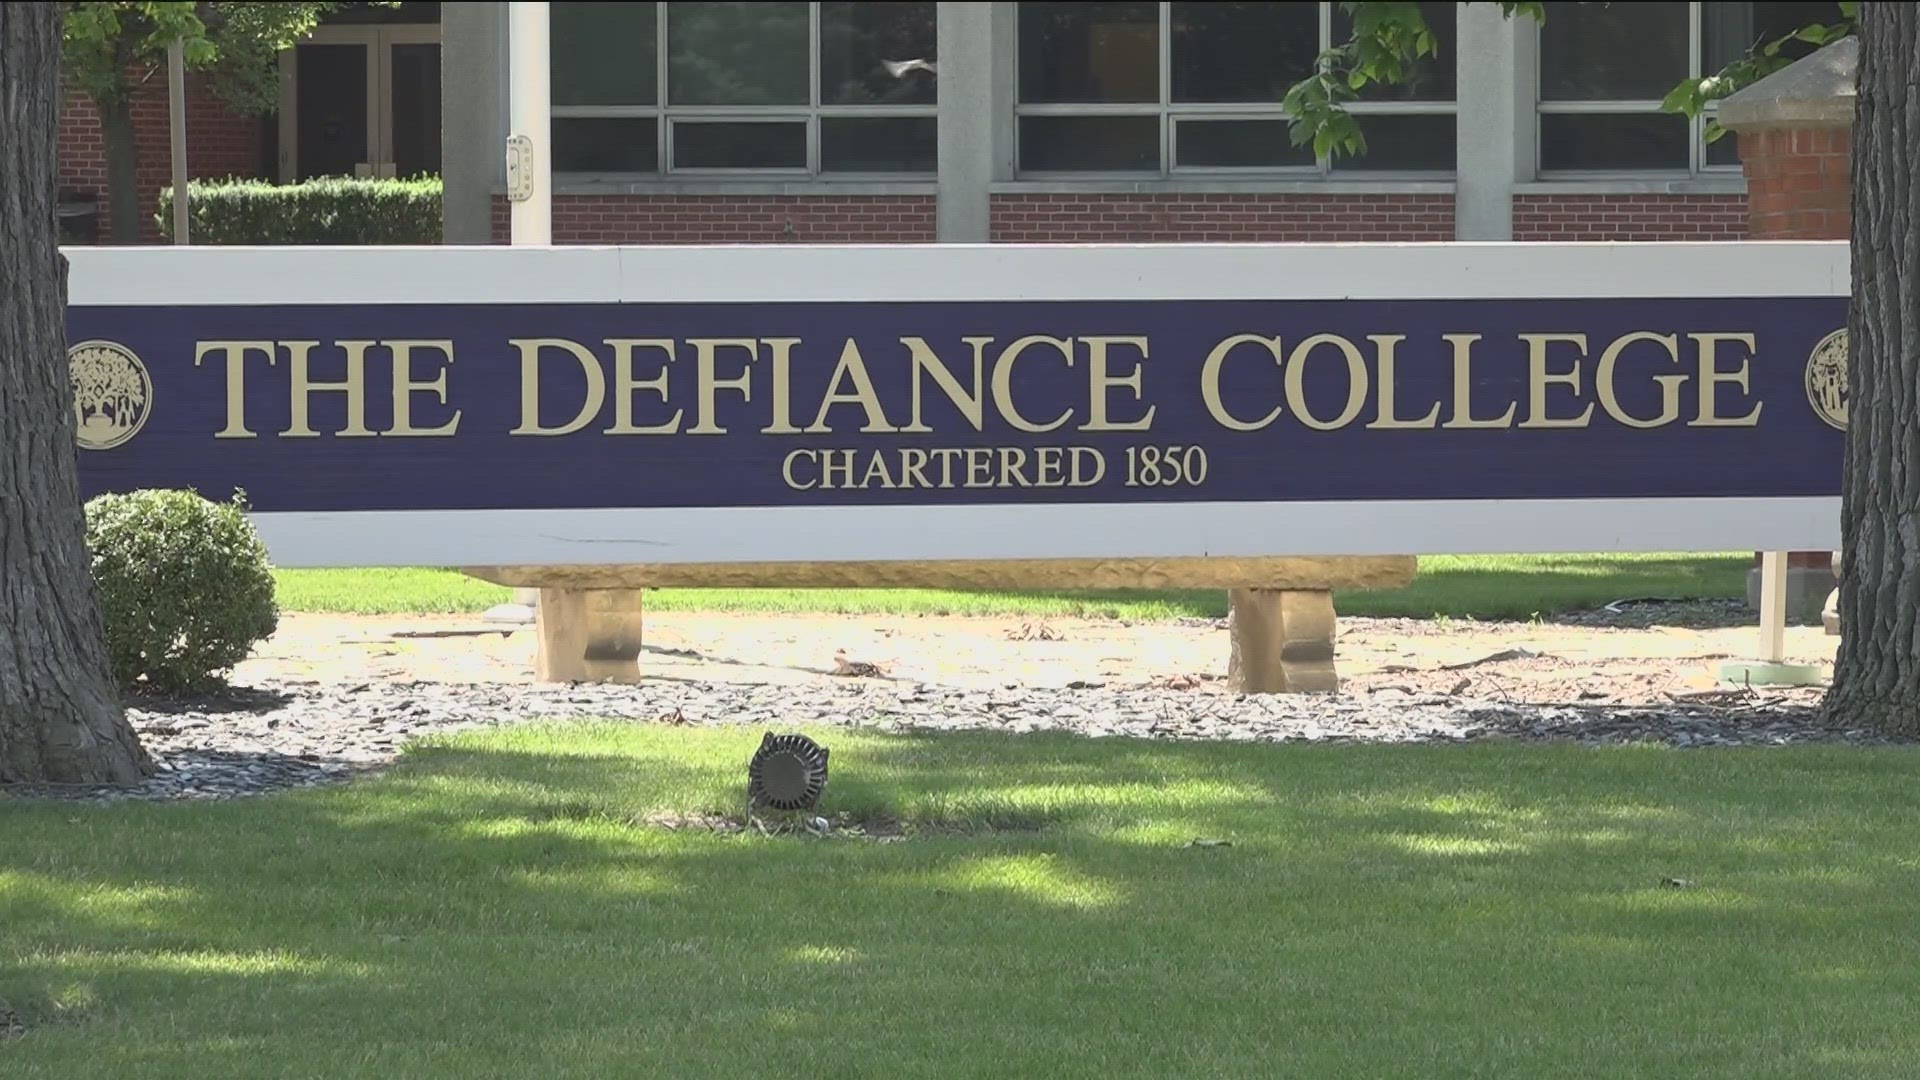 The college was out of compliance for accreditation with the Higher Learning Commission, including financial and academic issues.